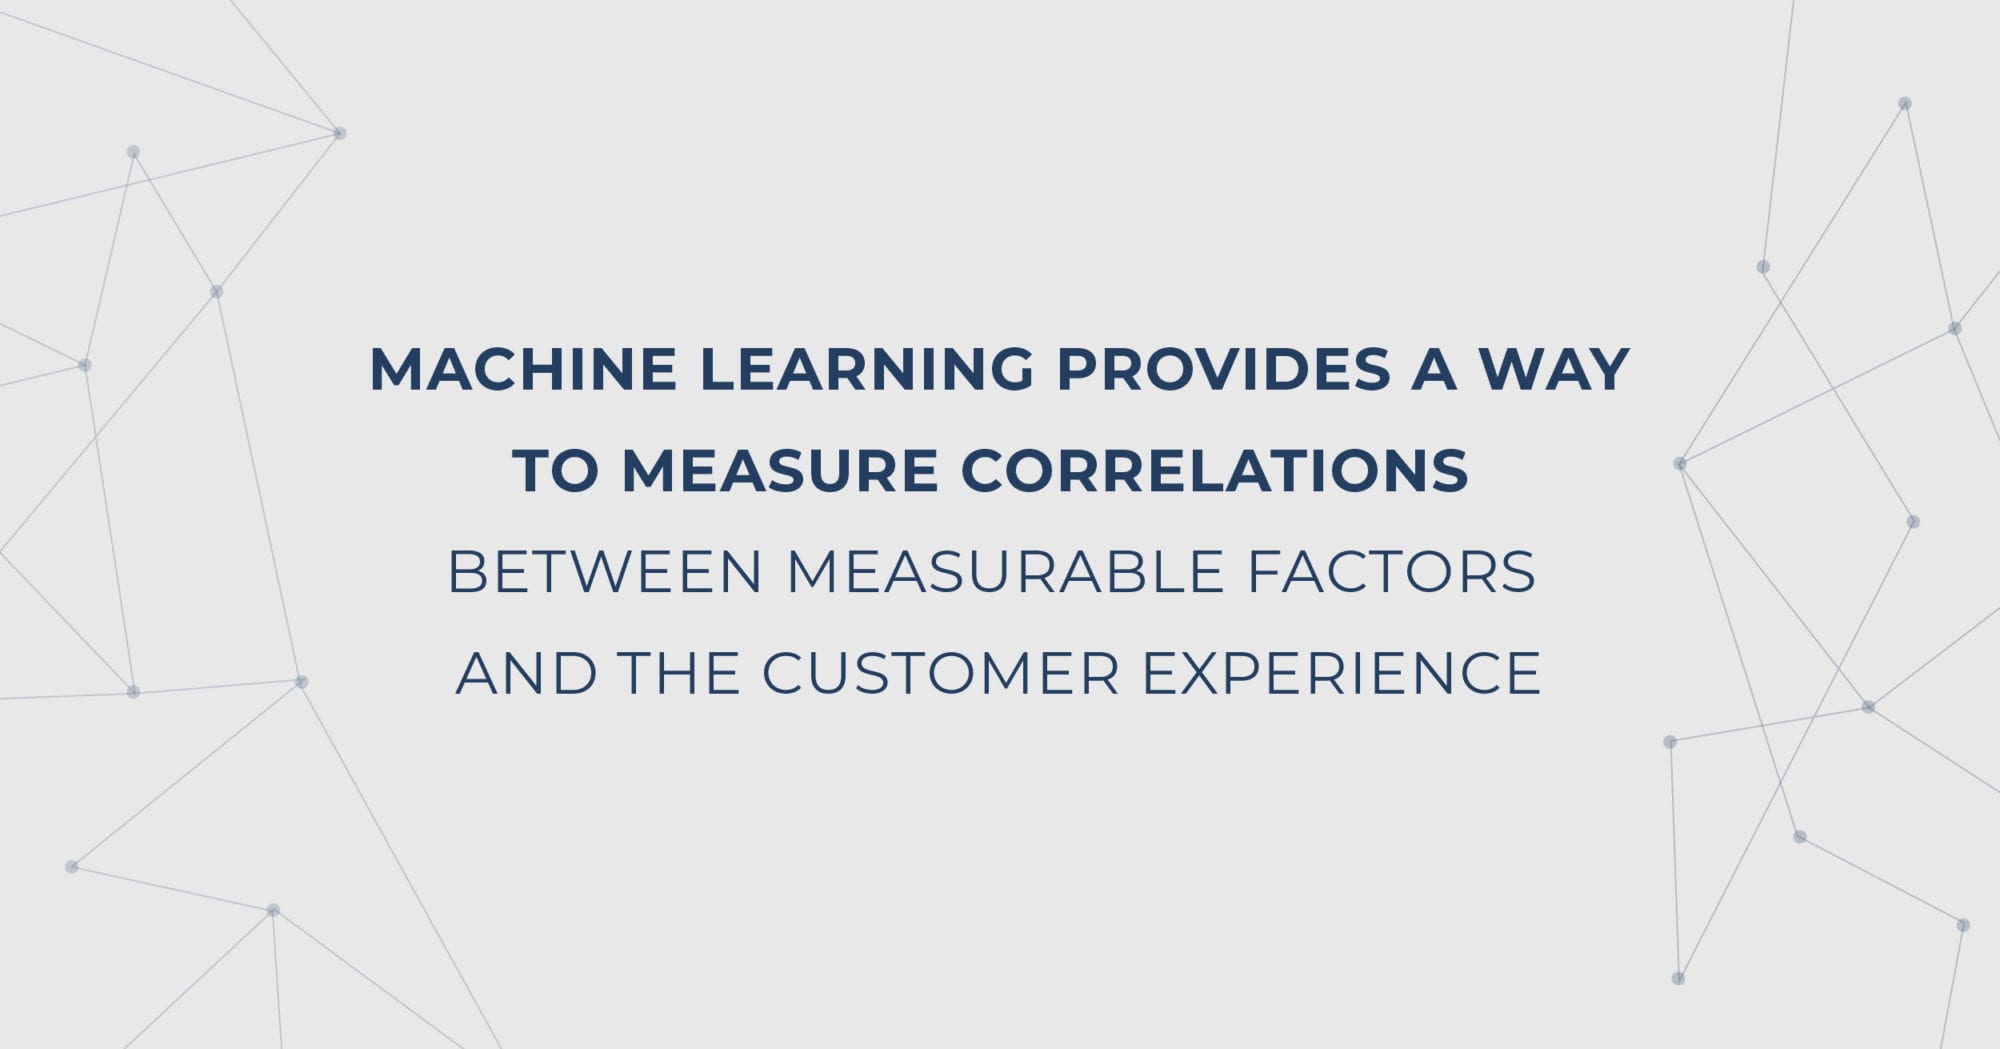 Quote: Machine learning provides a way to measure correlations between measurable factors and the customer experience.